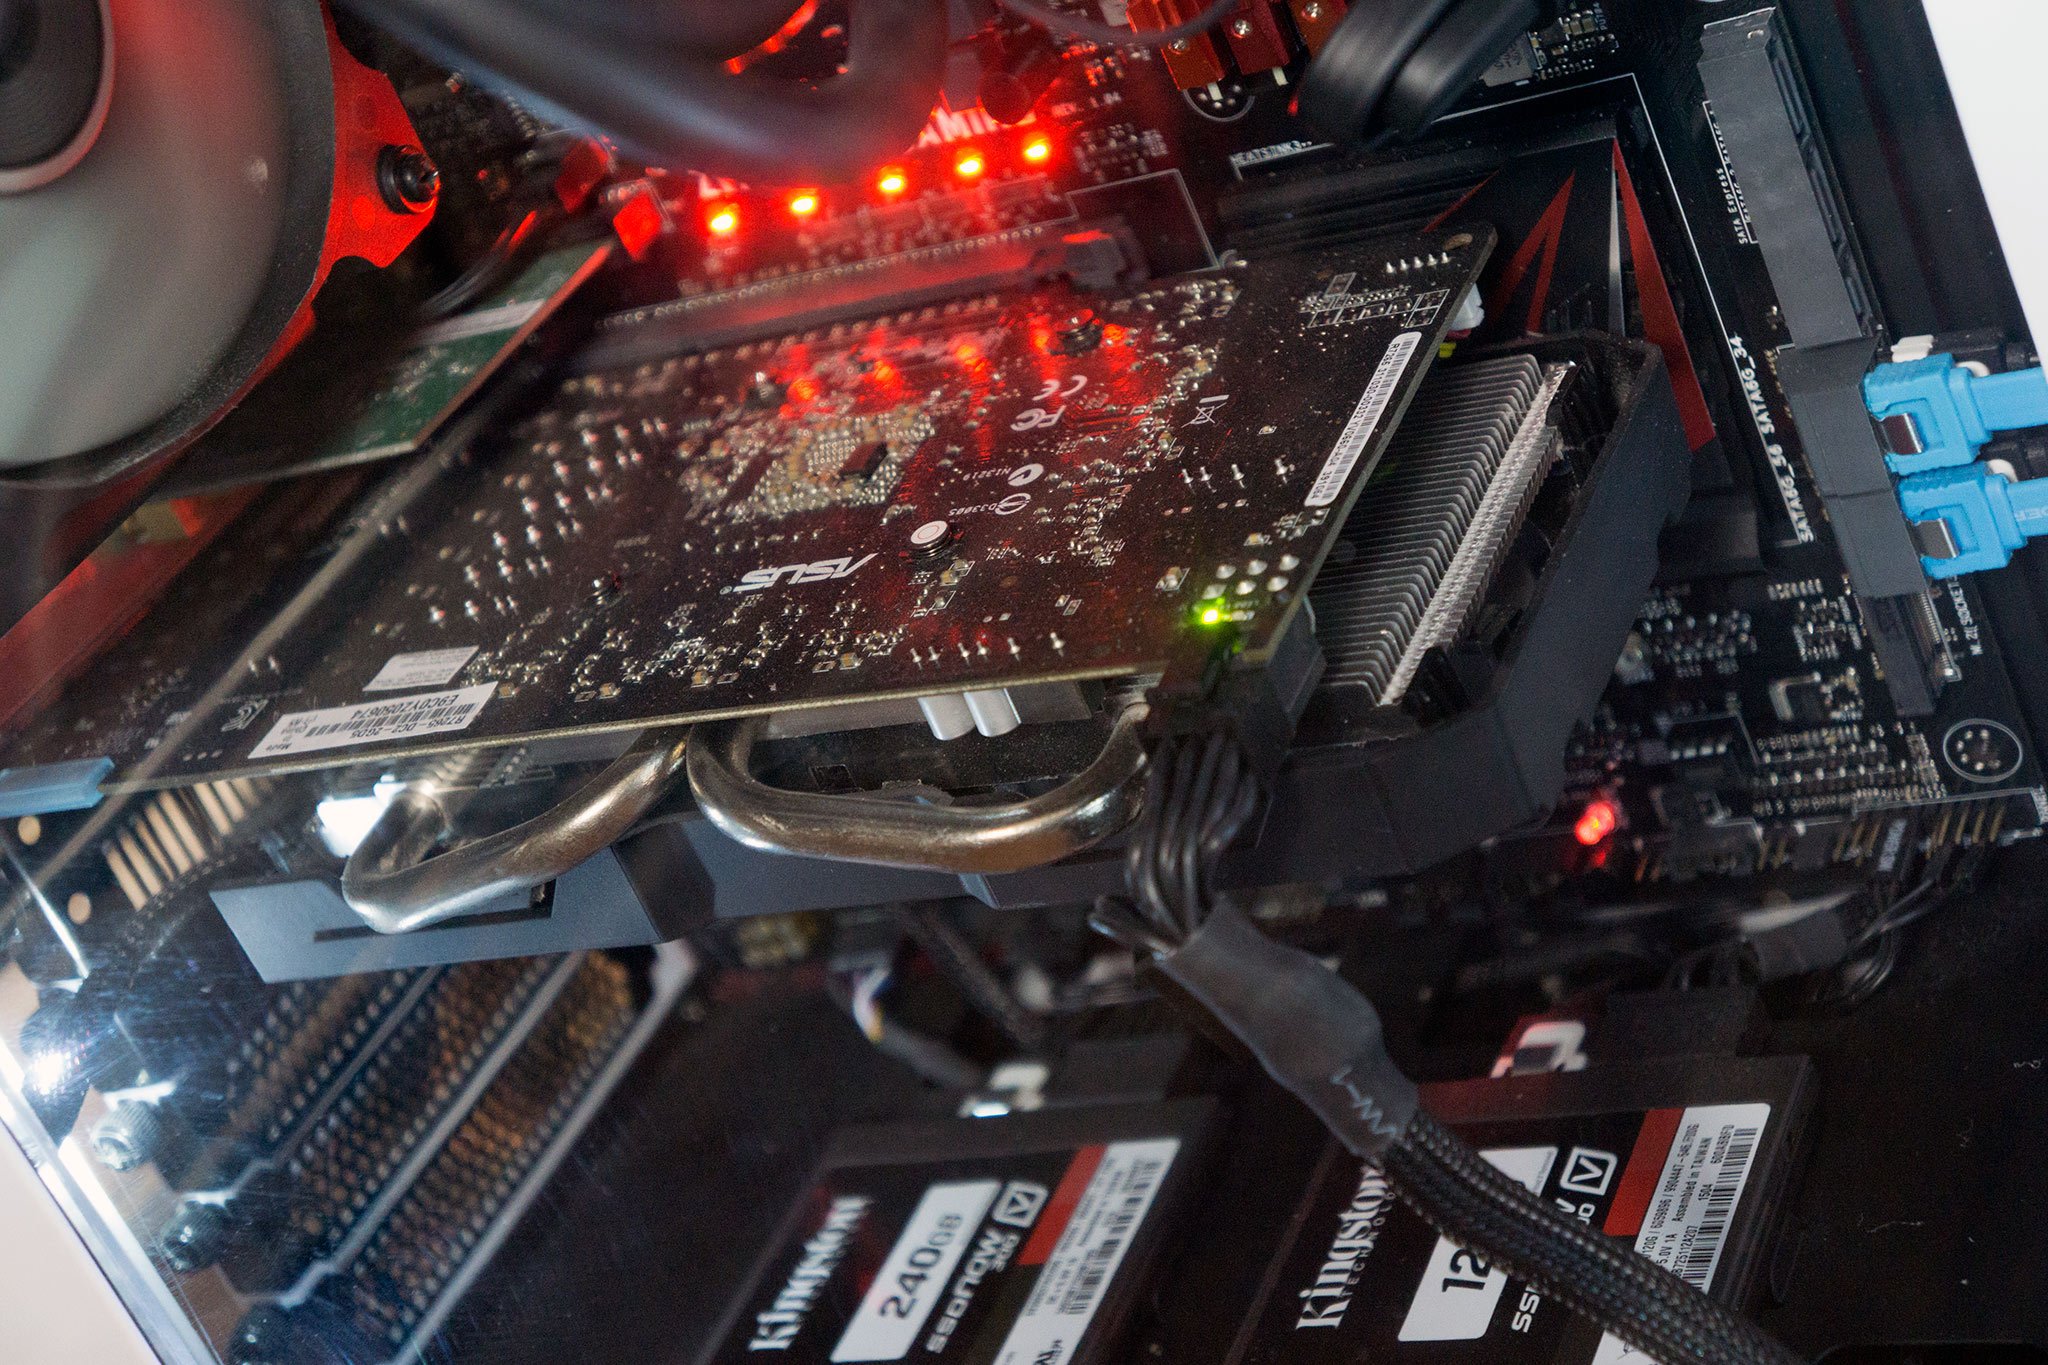 How to make sure all your PC components are compatible